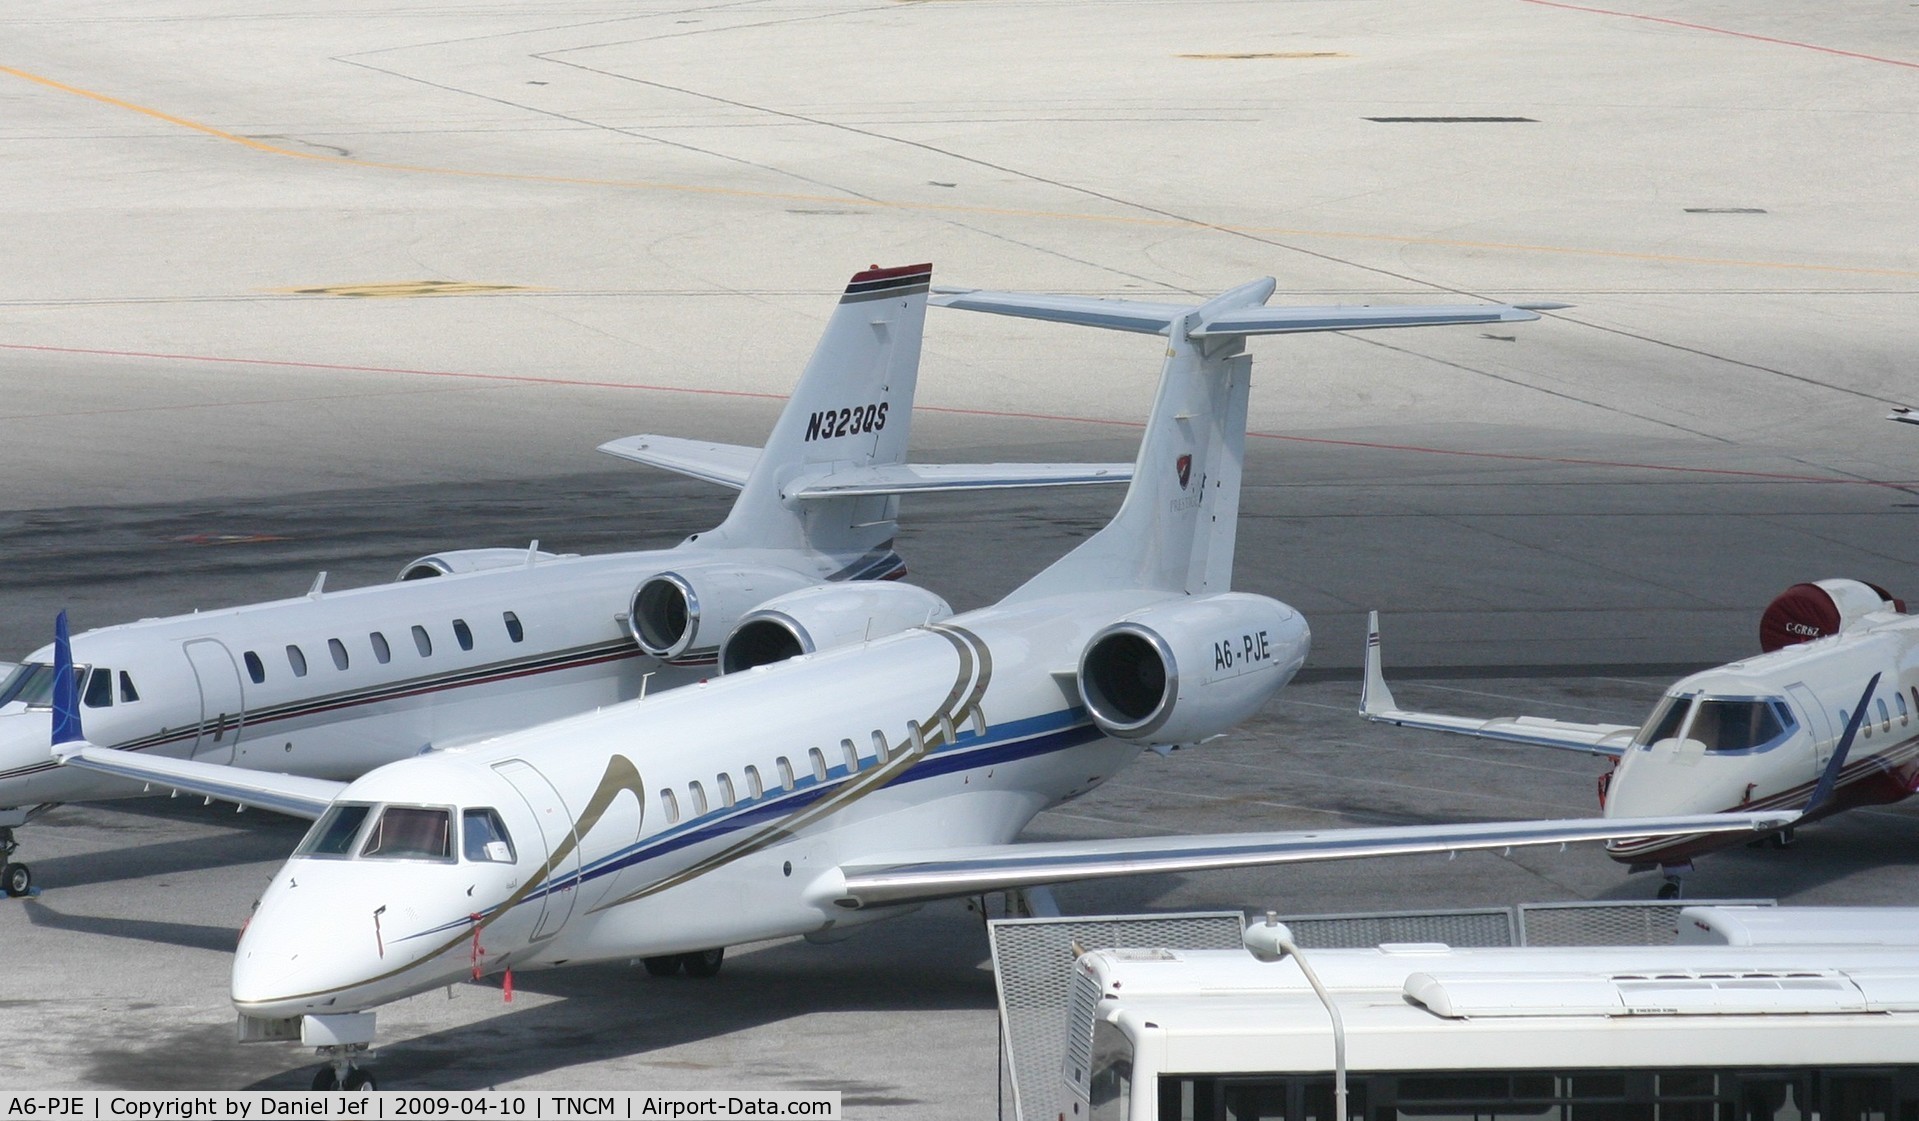 A6-PJE, 2006 Embraer Legacy 600 (EMB-135BJ) C/N 14500972, A6-PJE park on the main ramp at TNCM